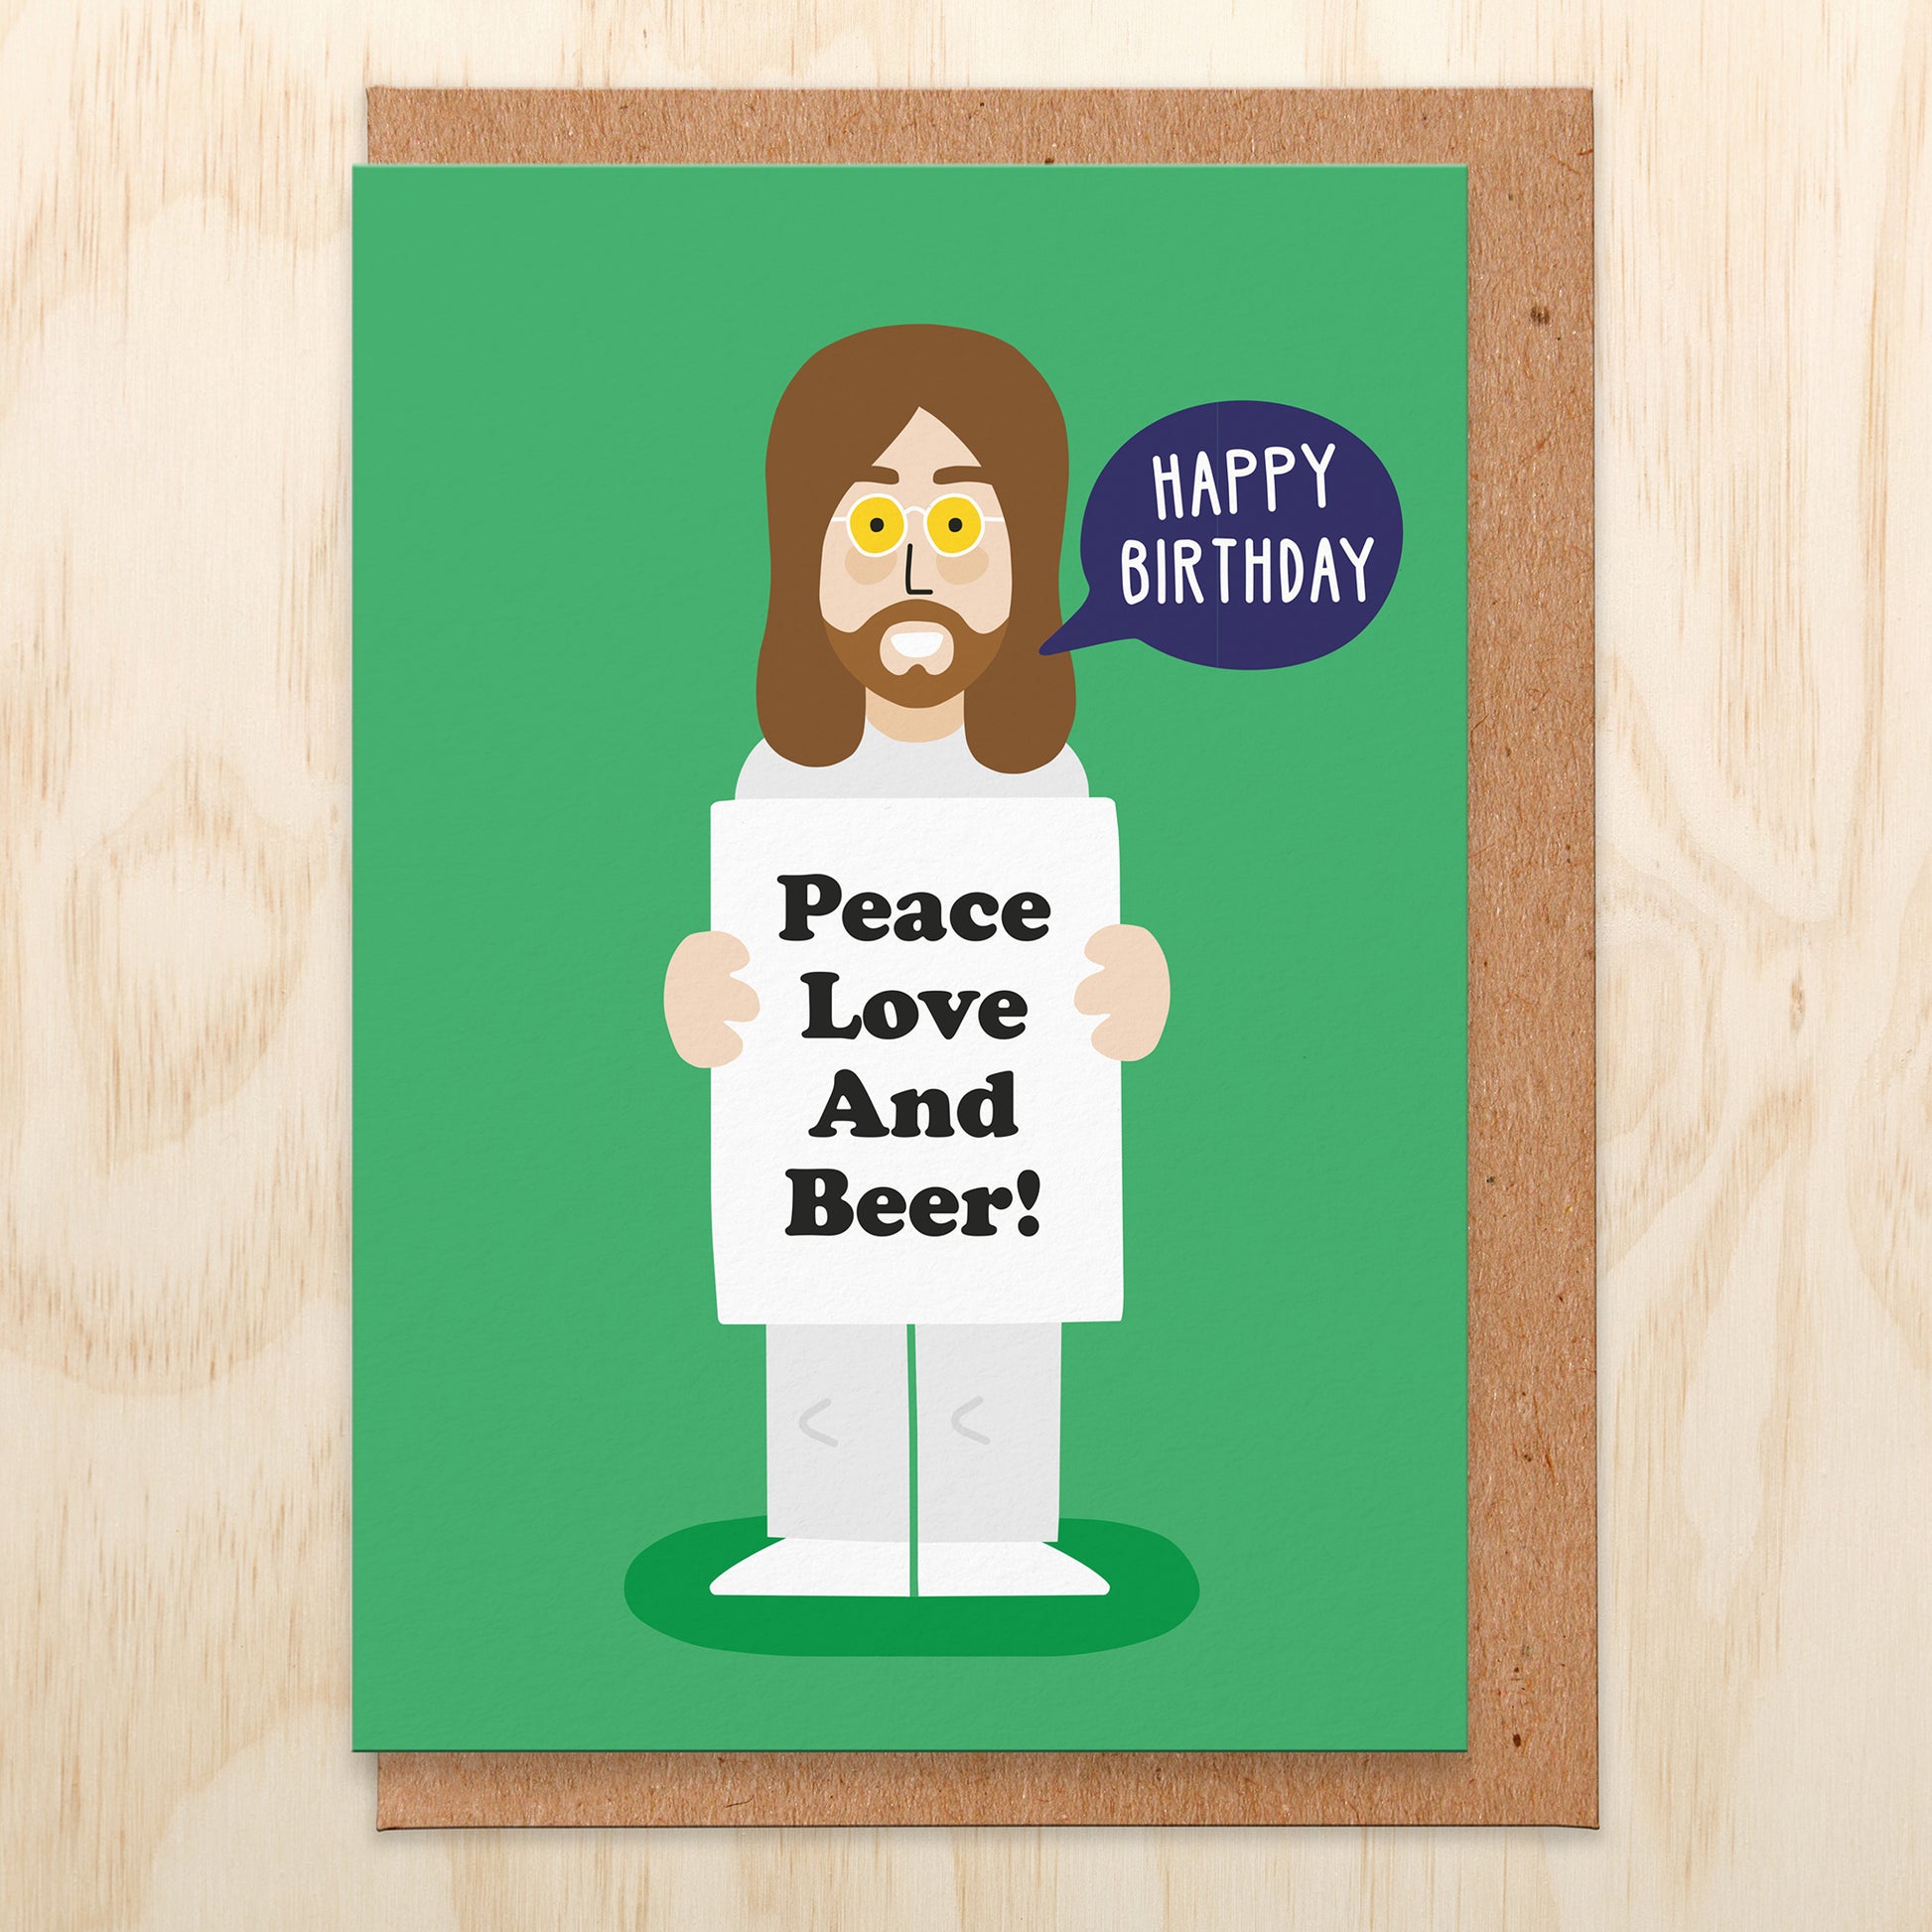 Green greetings card with an illustration of John holding a sign that says peace love and beer. There is a speech bubble saying happy birthday.